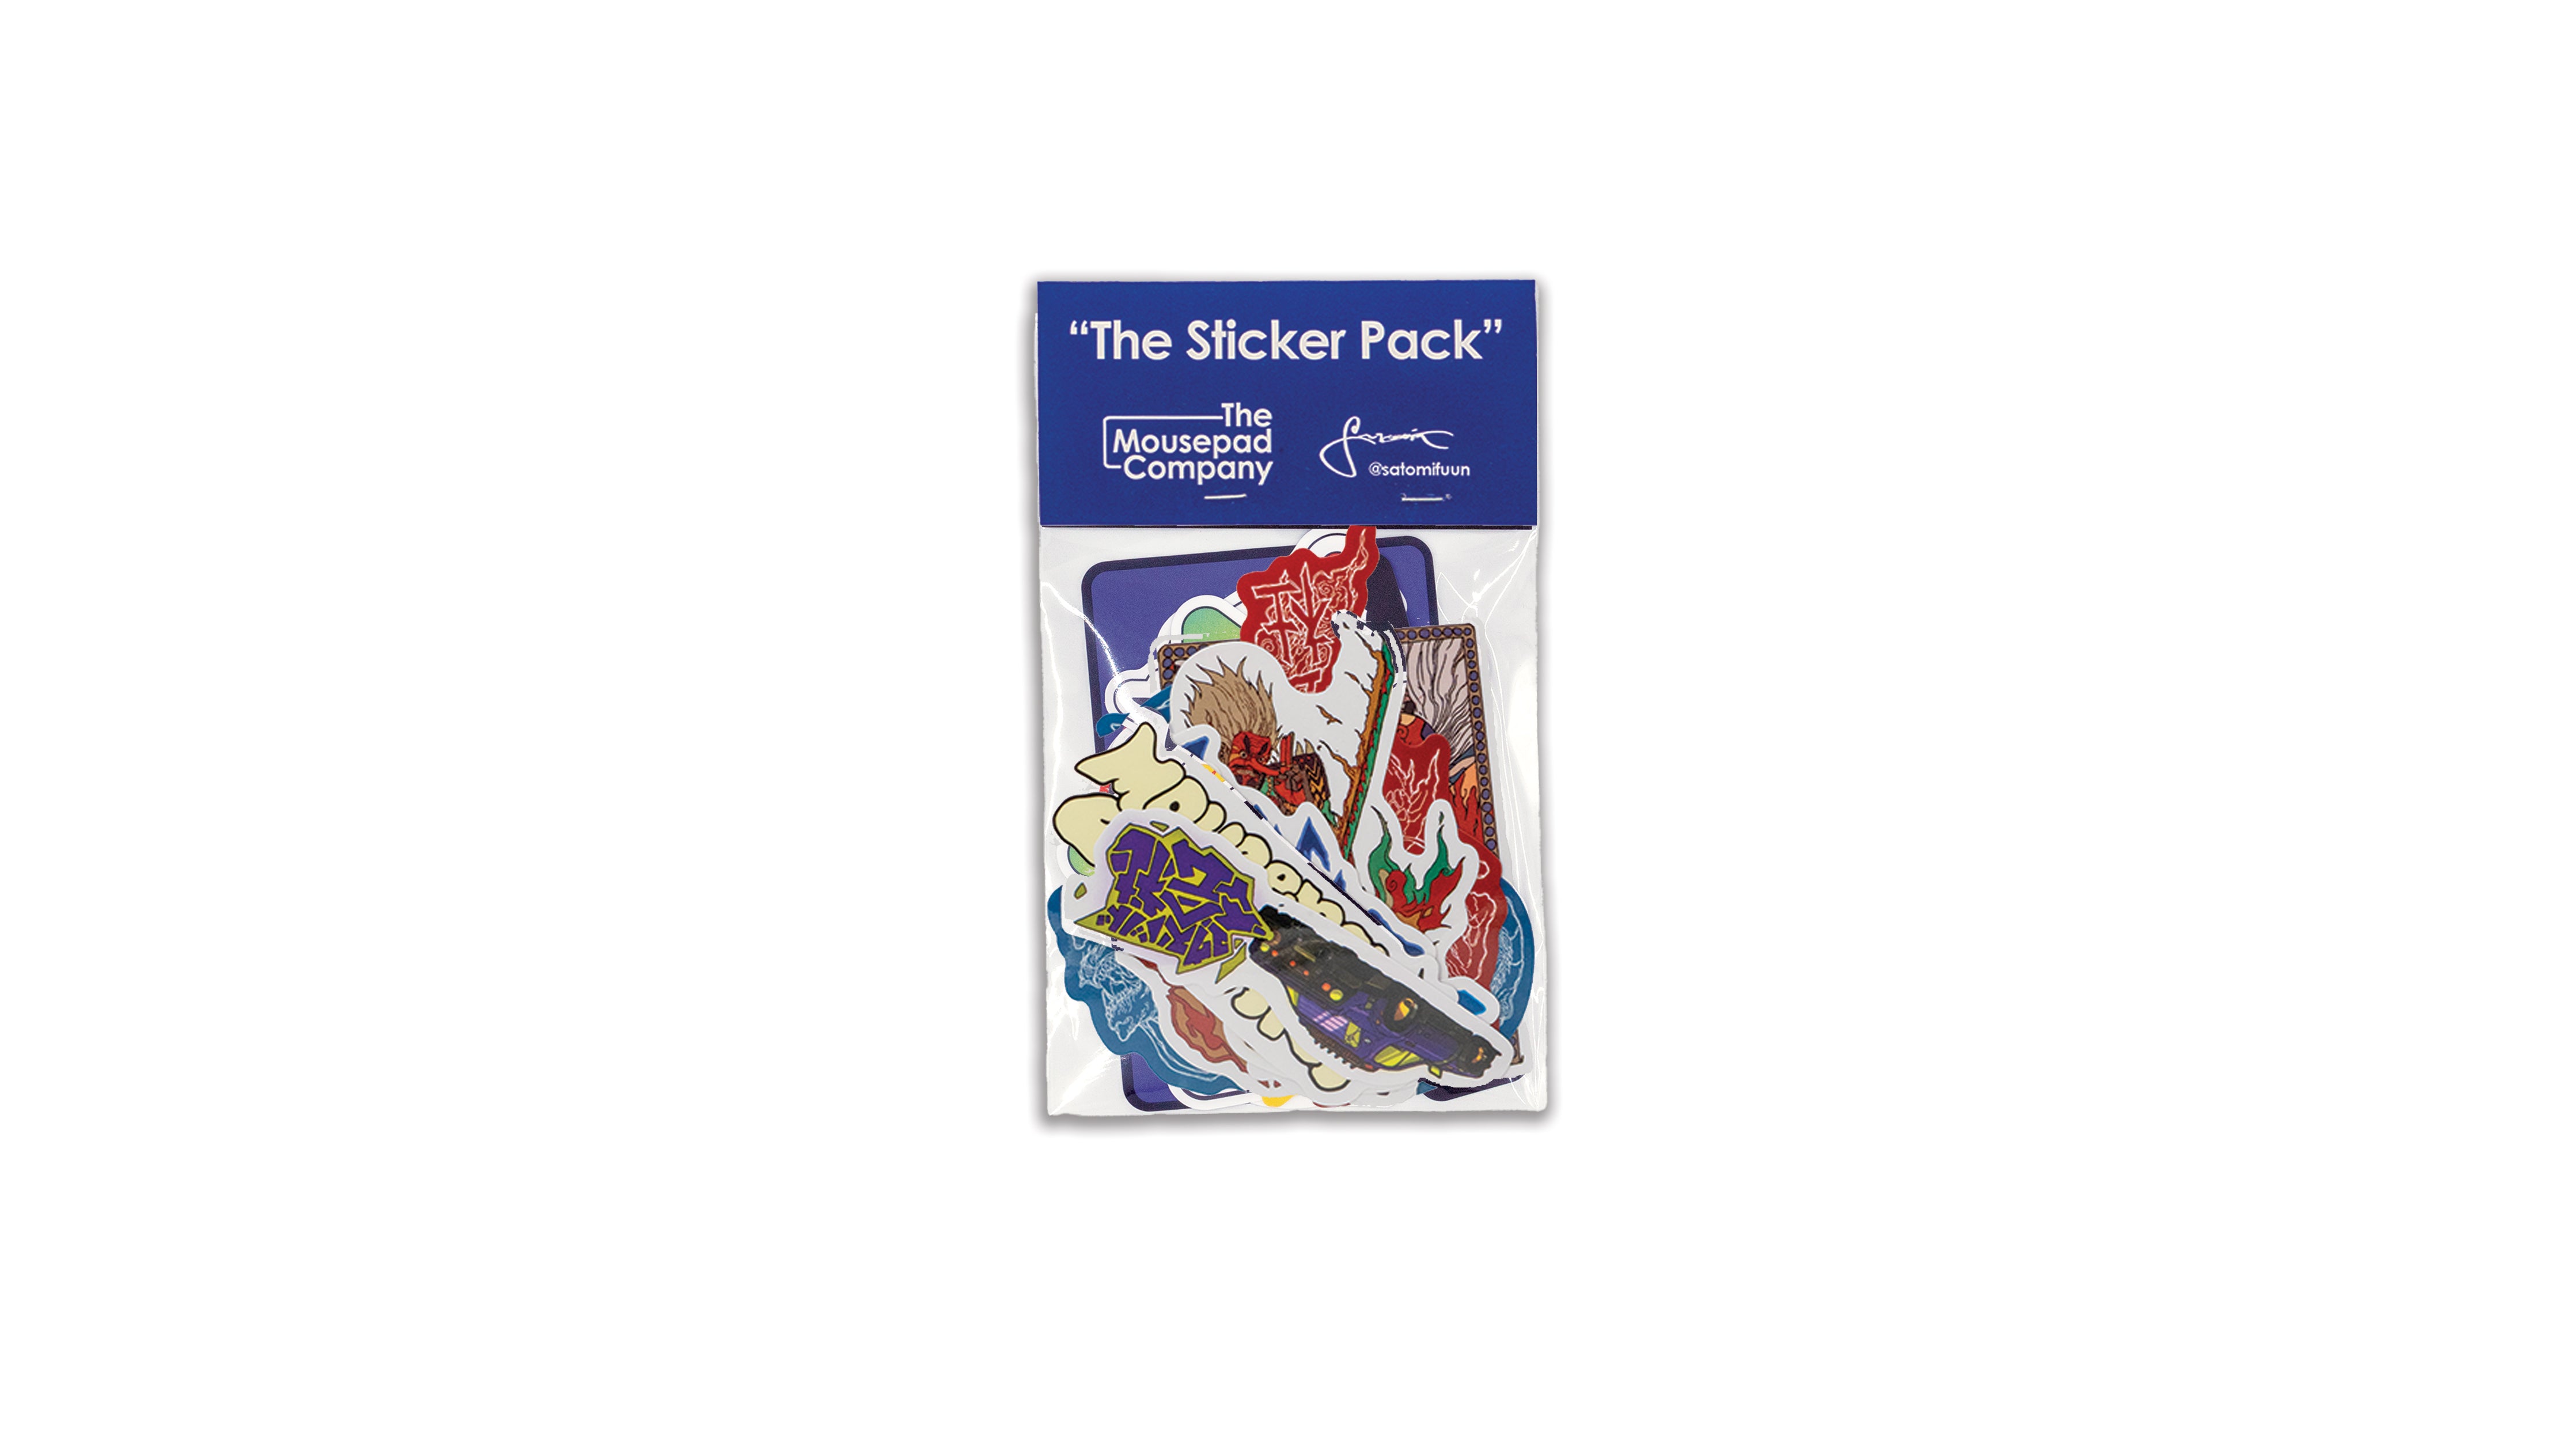 "The Sticker Pack"